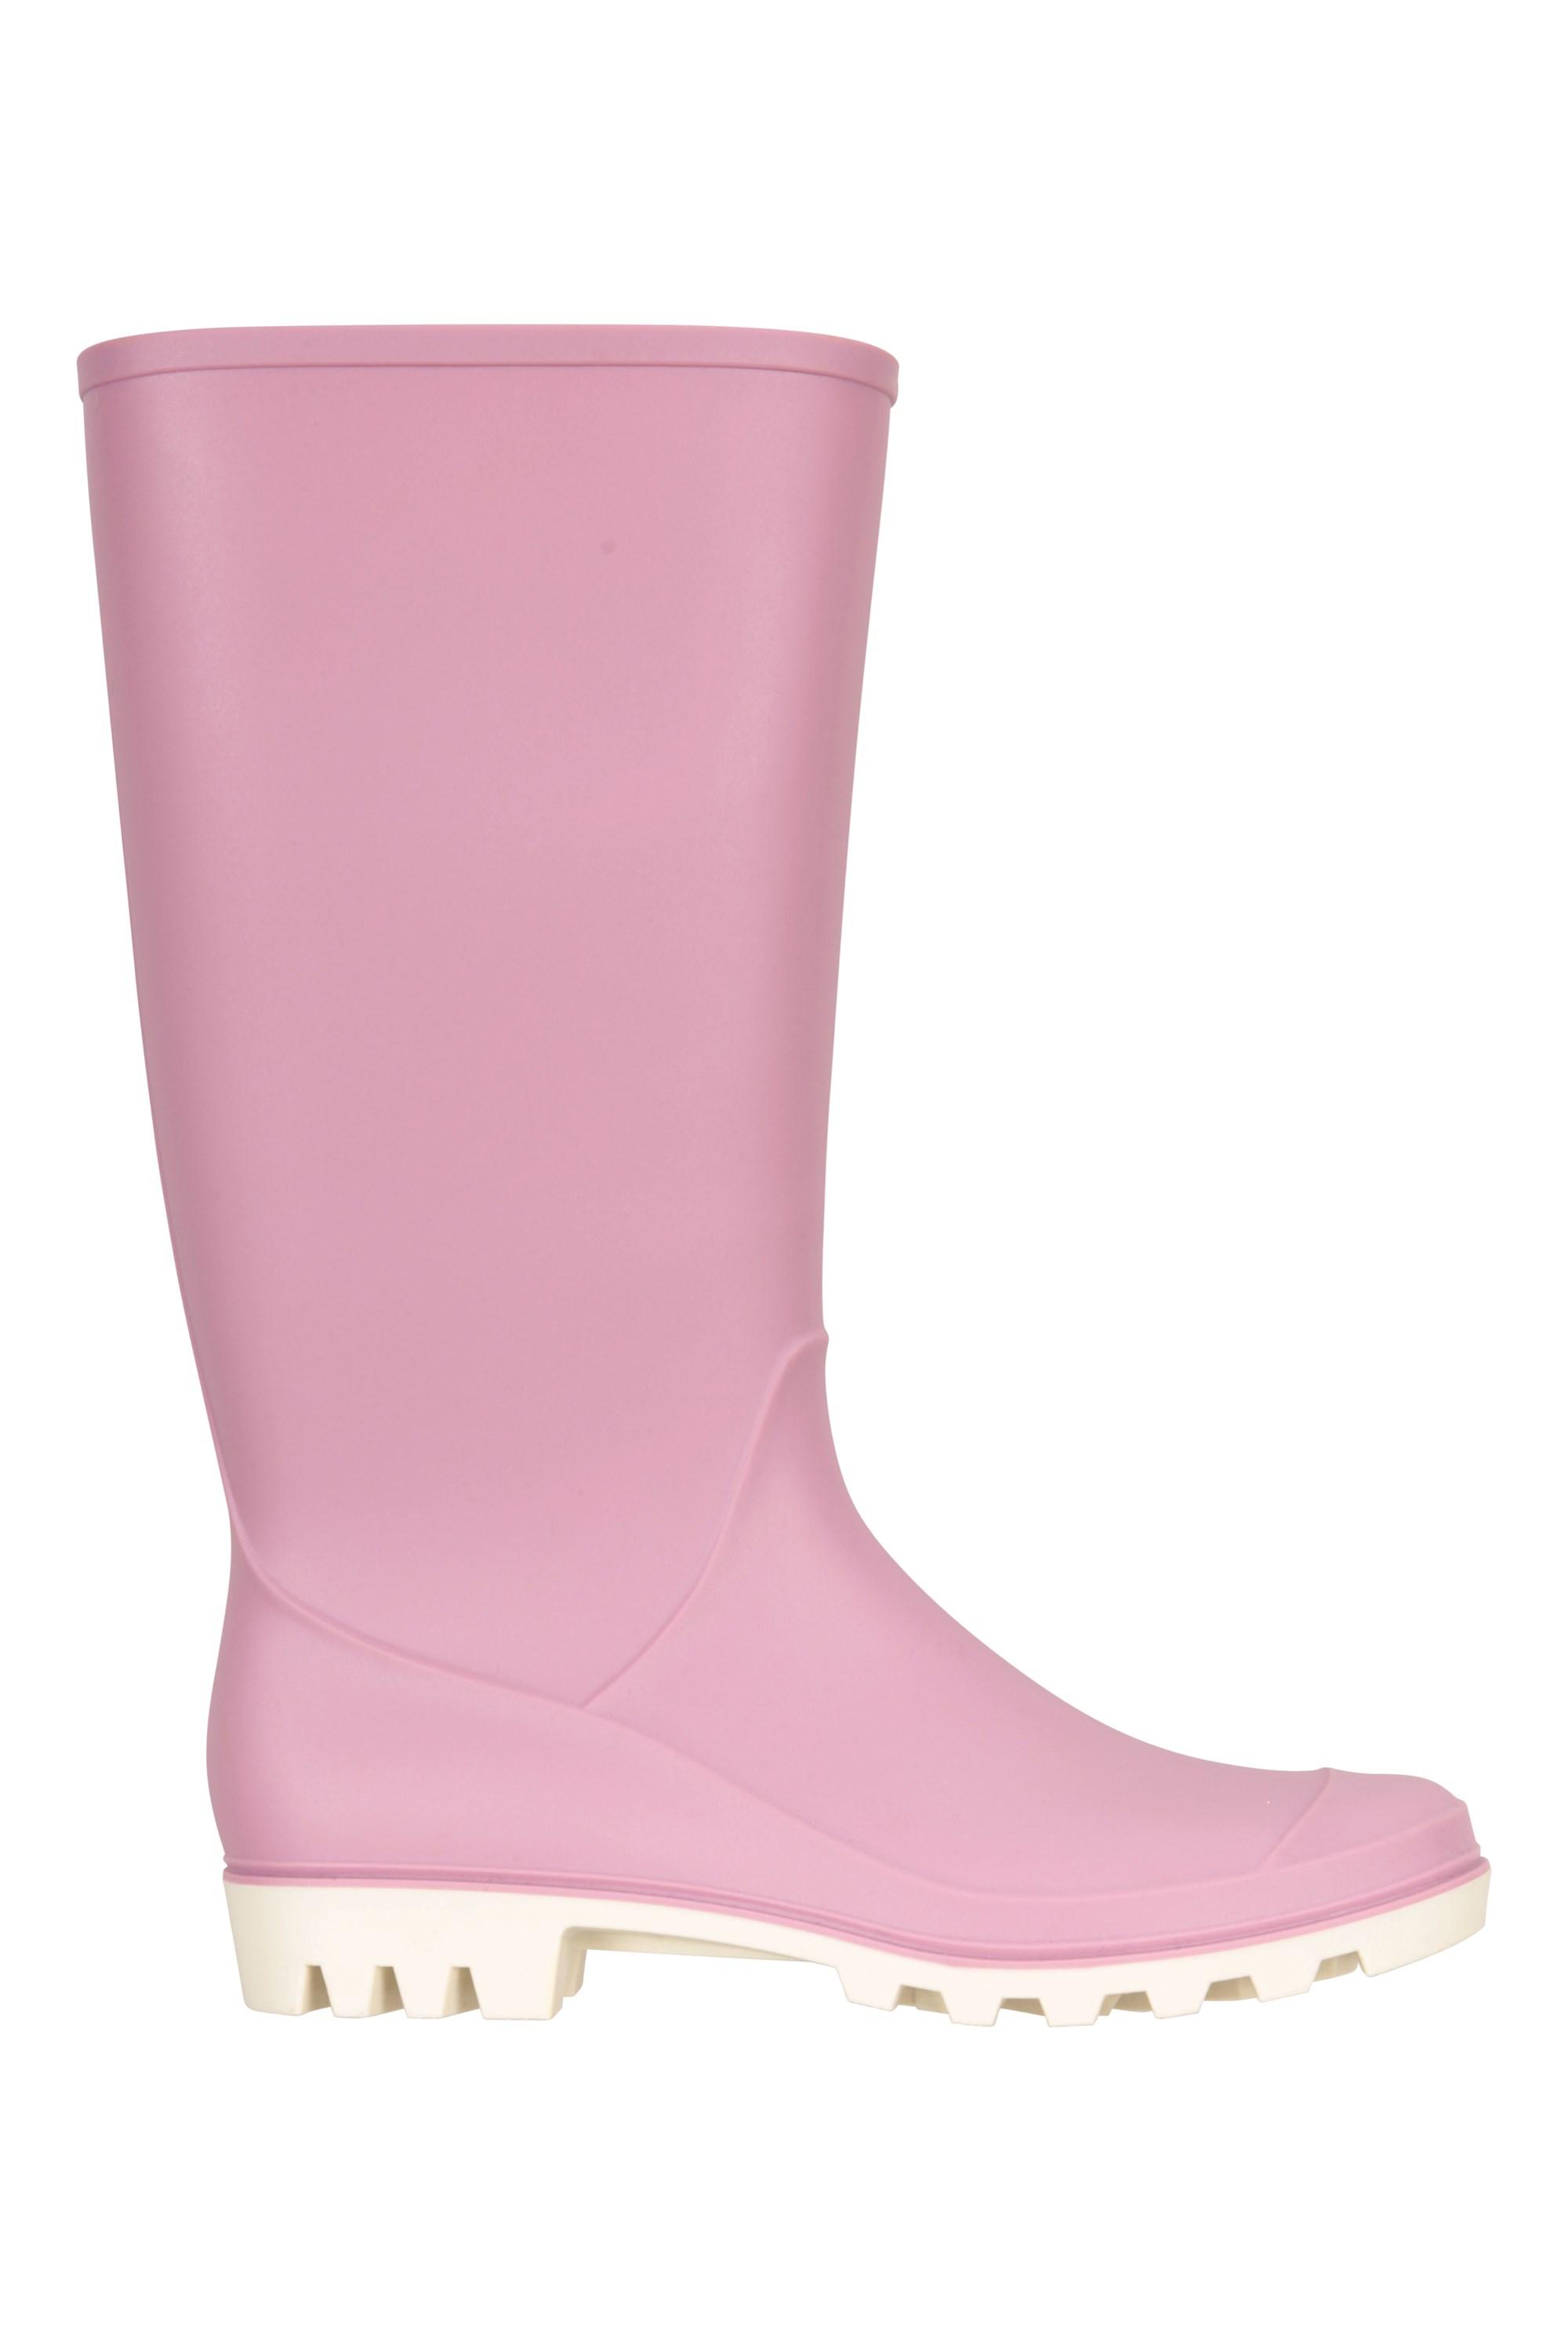 Mountain Warehouse Mid Height Womens Rubber Wellie